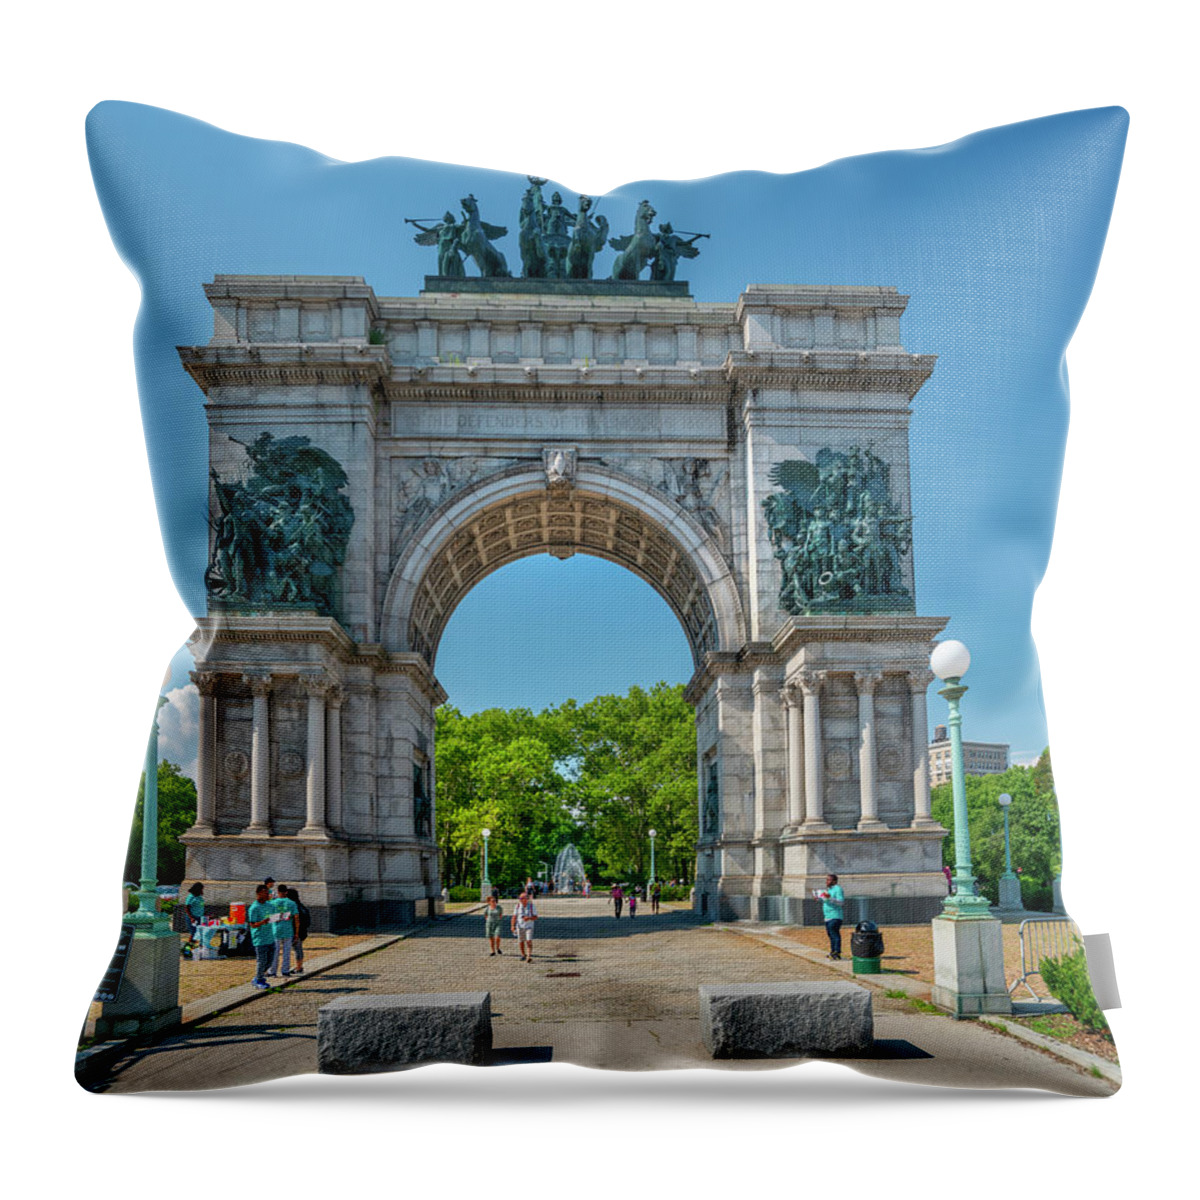 Estock Throw Pillow featuring the digital art Grand Army Plaza In Brooklyn Ny by Laura Zeid